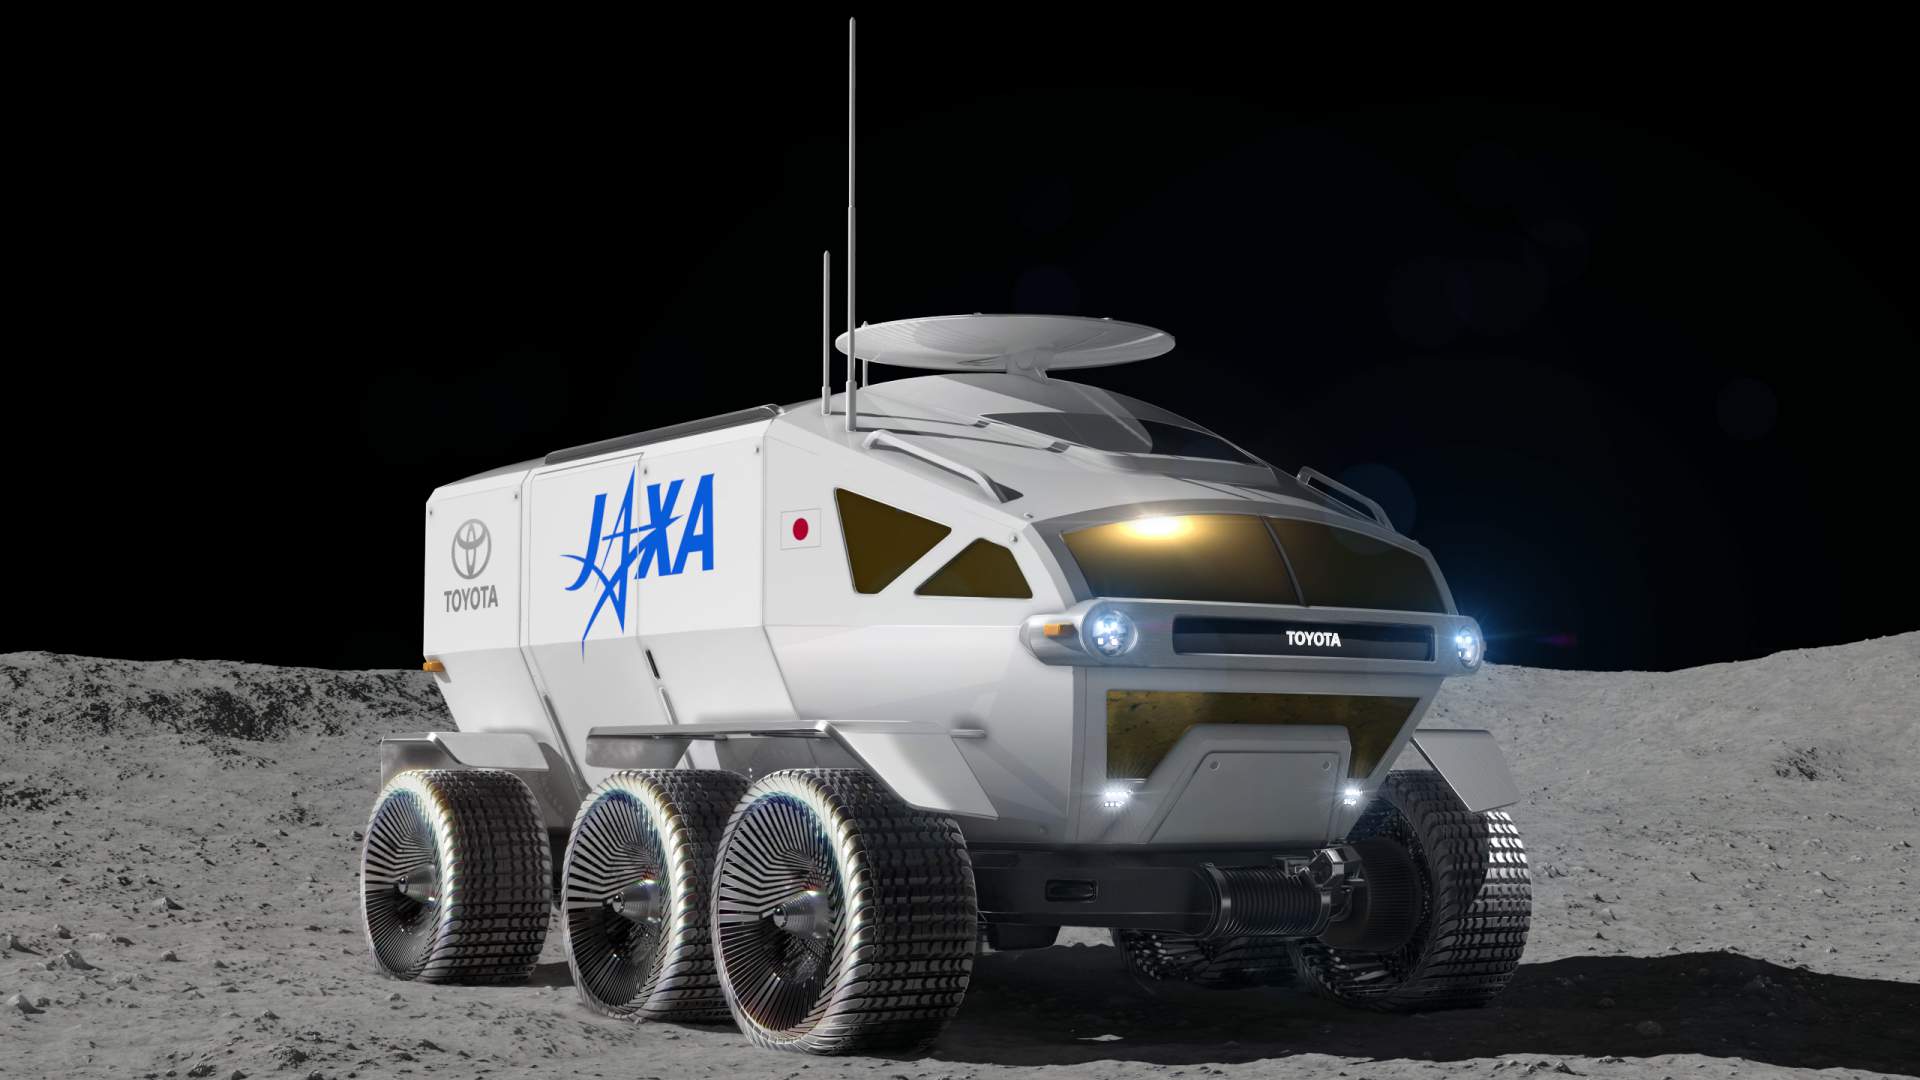 1847a084-toyota-fuel-cell-electric-lunar-rover-project-1.jpg